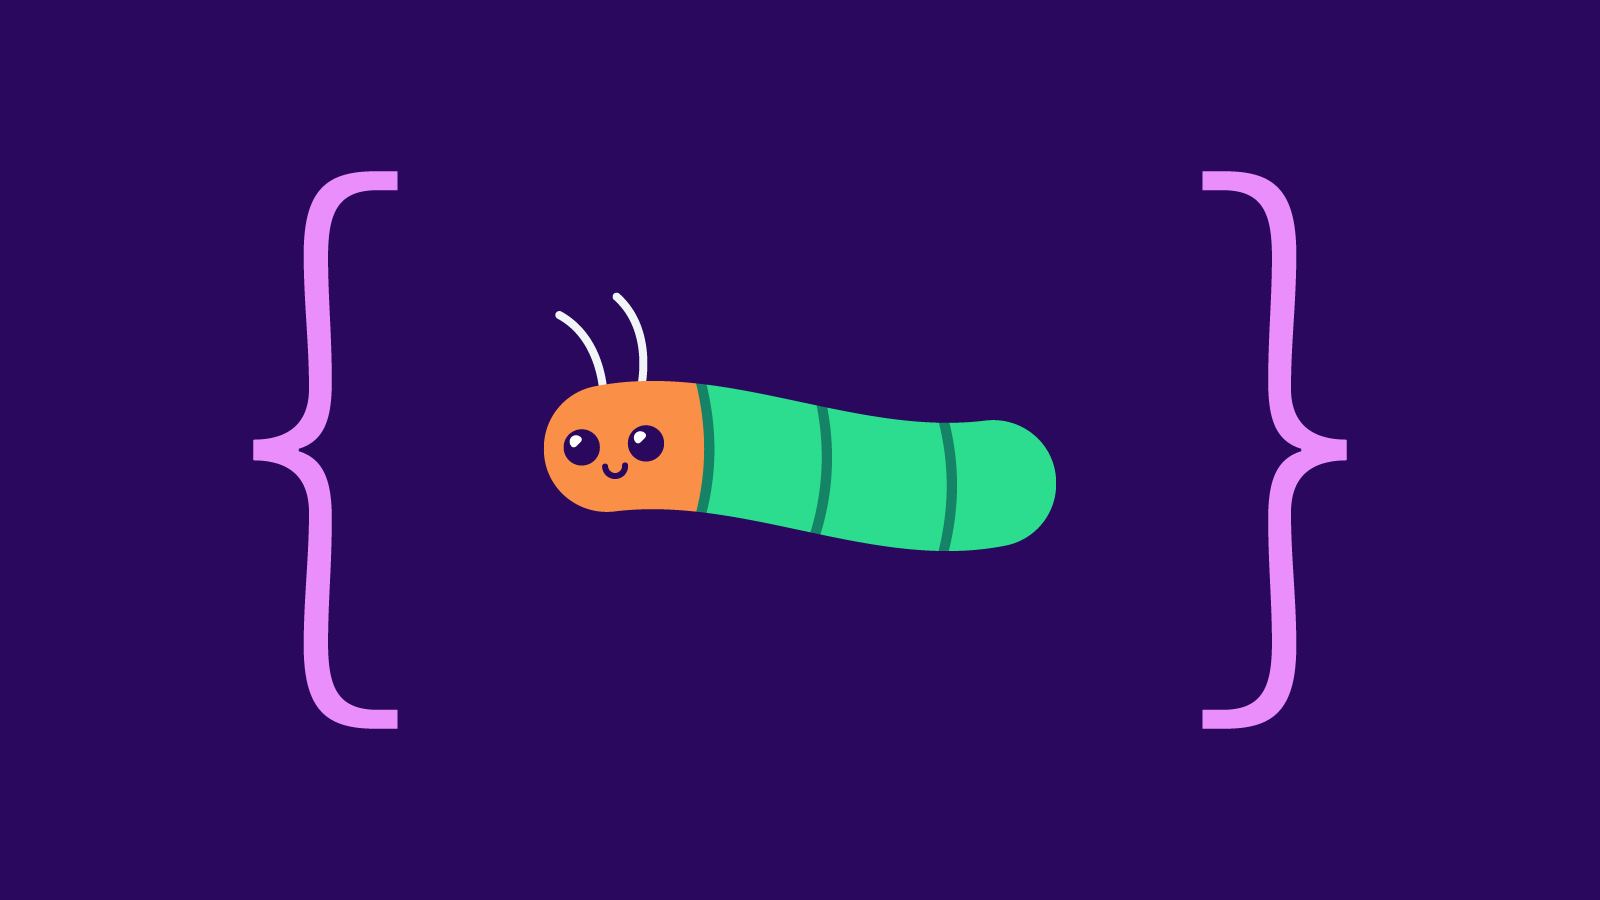 A cute, smiling bug between two code brackets